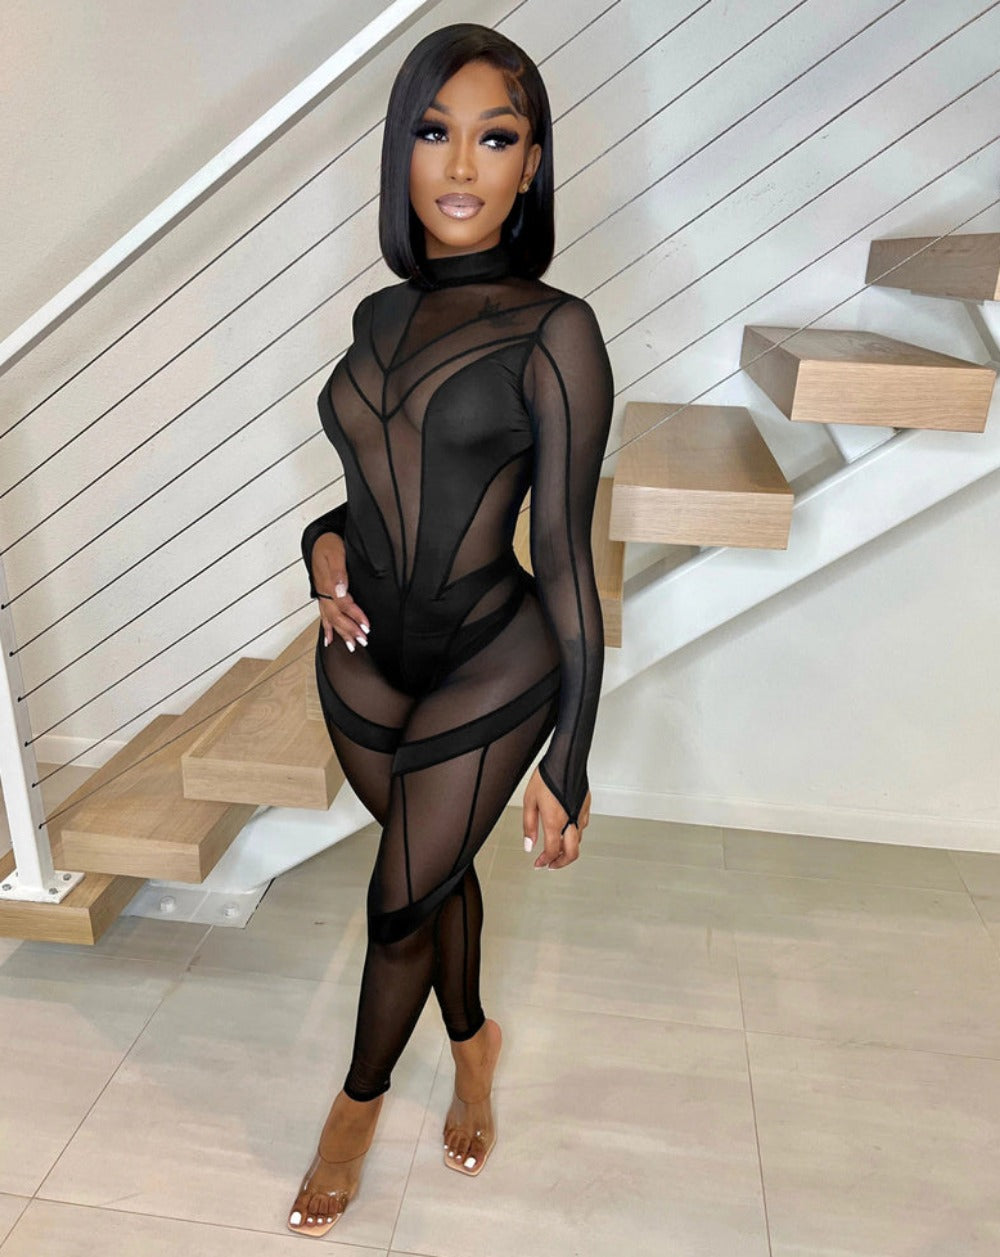 Everyday.Discount buy women dark mesh with sleeves velour inlay see through rompers instagram nightout pinterest coctail parties tiktok facebook.summer clubbing beachclub dancewear broath clothes streetwear clothes onesuit jump suit women's bodysuits nightout clothing free.shipping